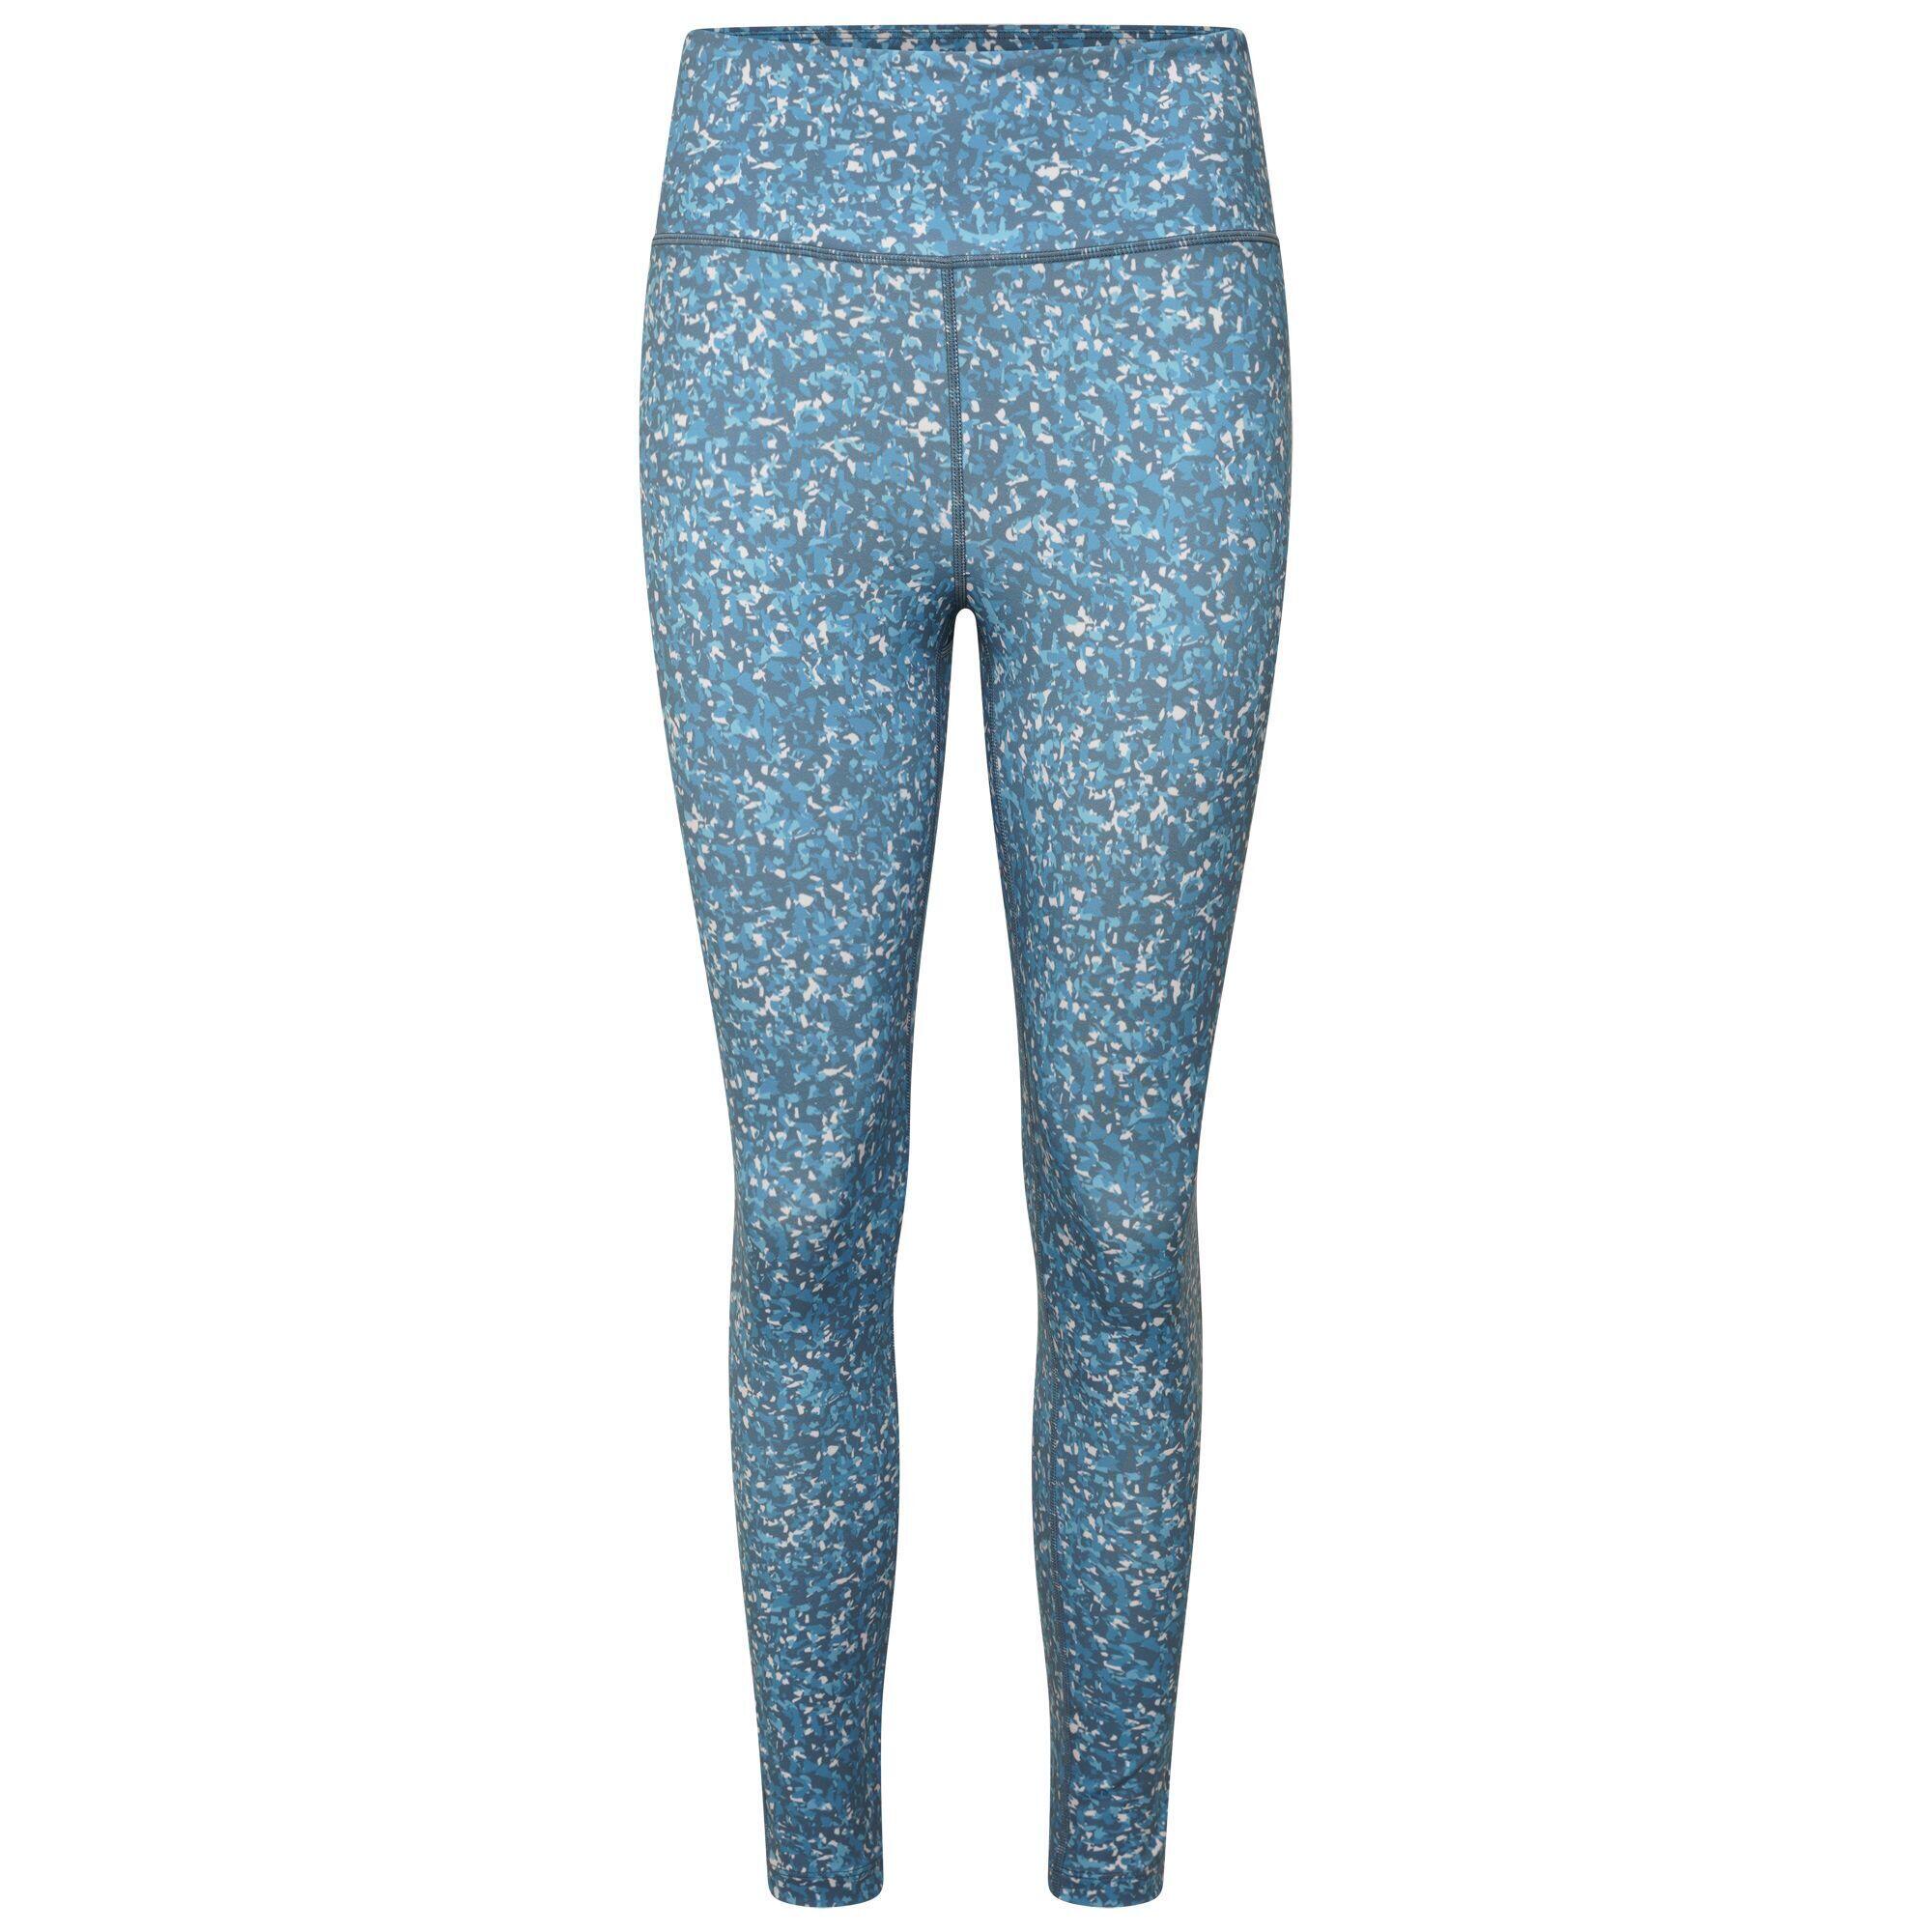 DARE 2B Womens/Ladies Influential Fracture Print Recycled Jeggings (Capri Blue)